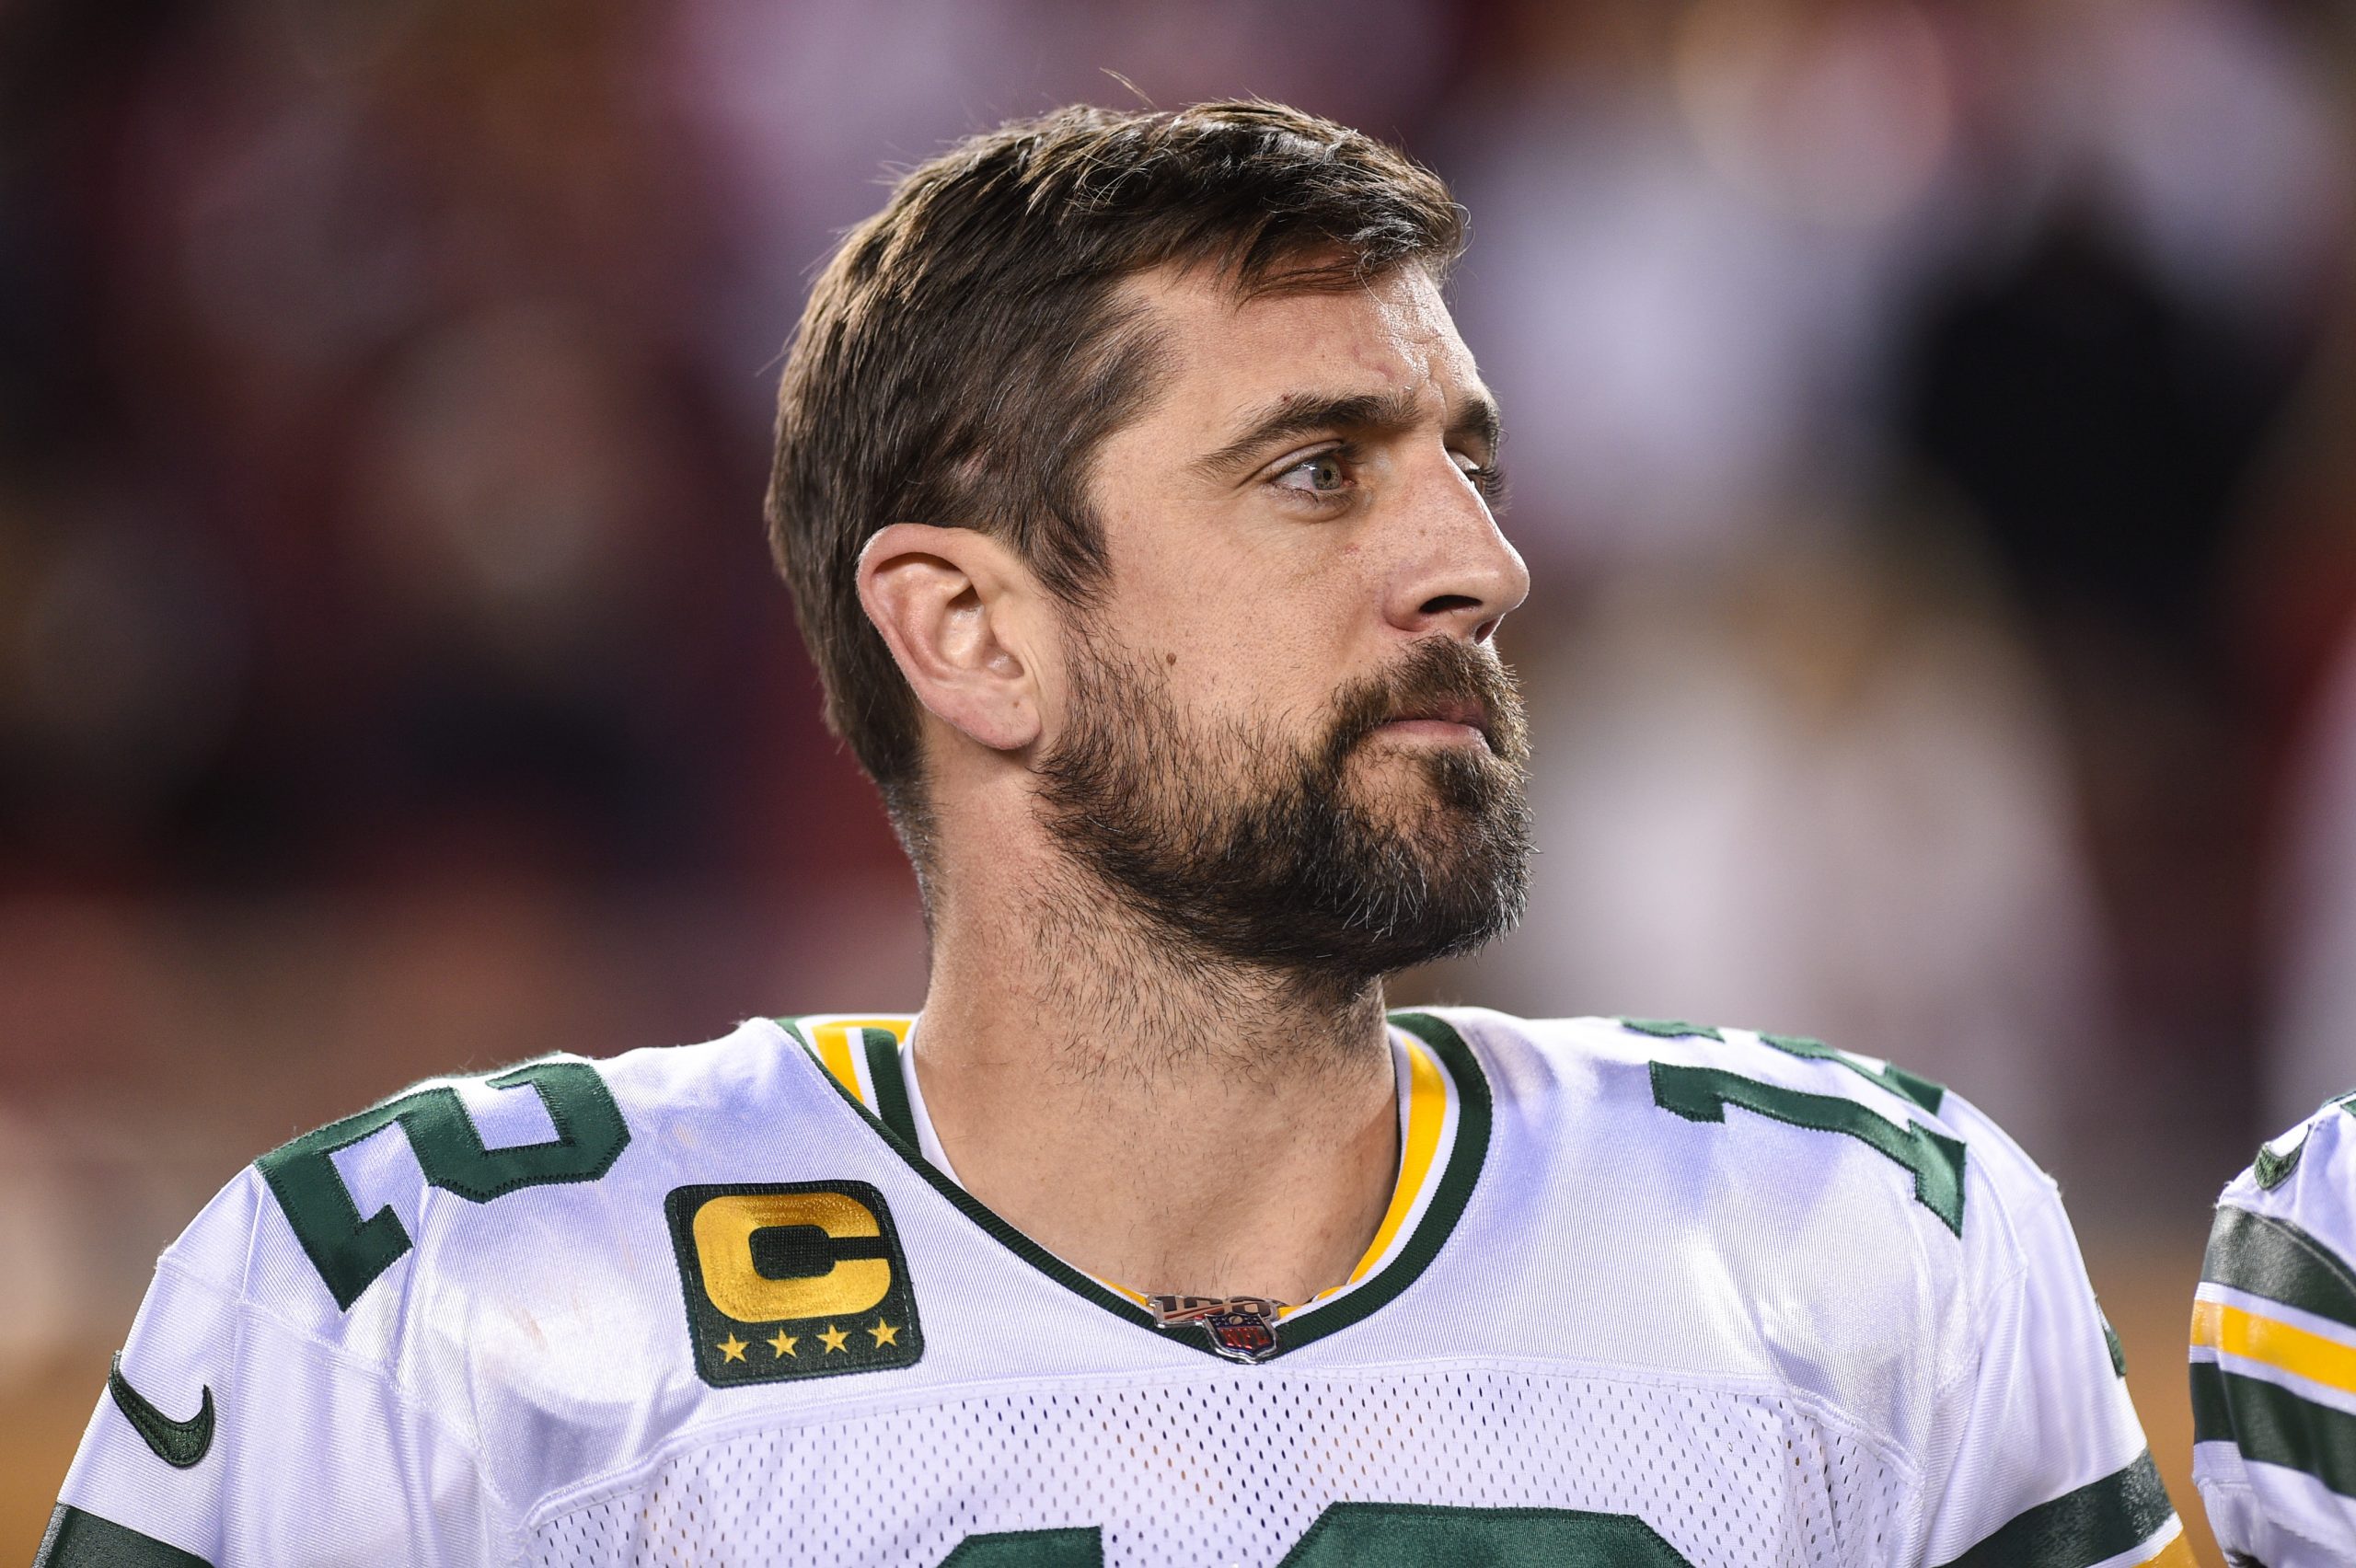 SANTA CLARA, CA - NOVEMBER 24: Green Bay Packers Quarterback Aaron Rodgers (12) on the sidelines before the NFL, America